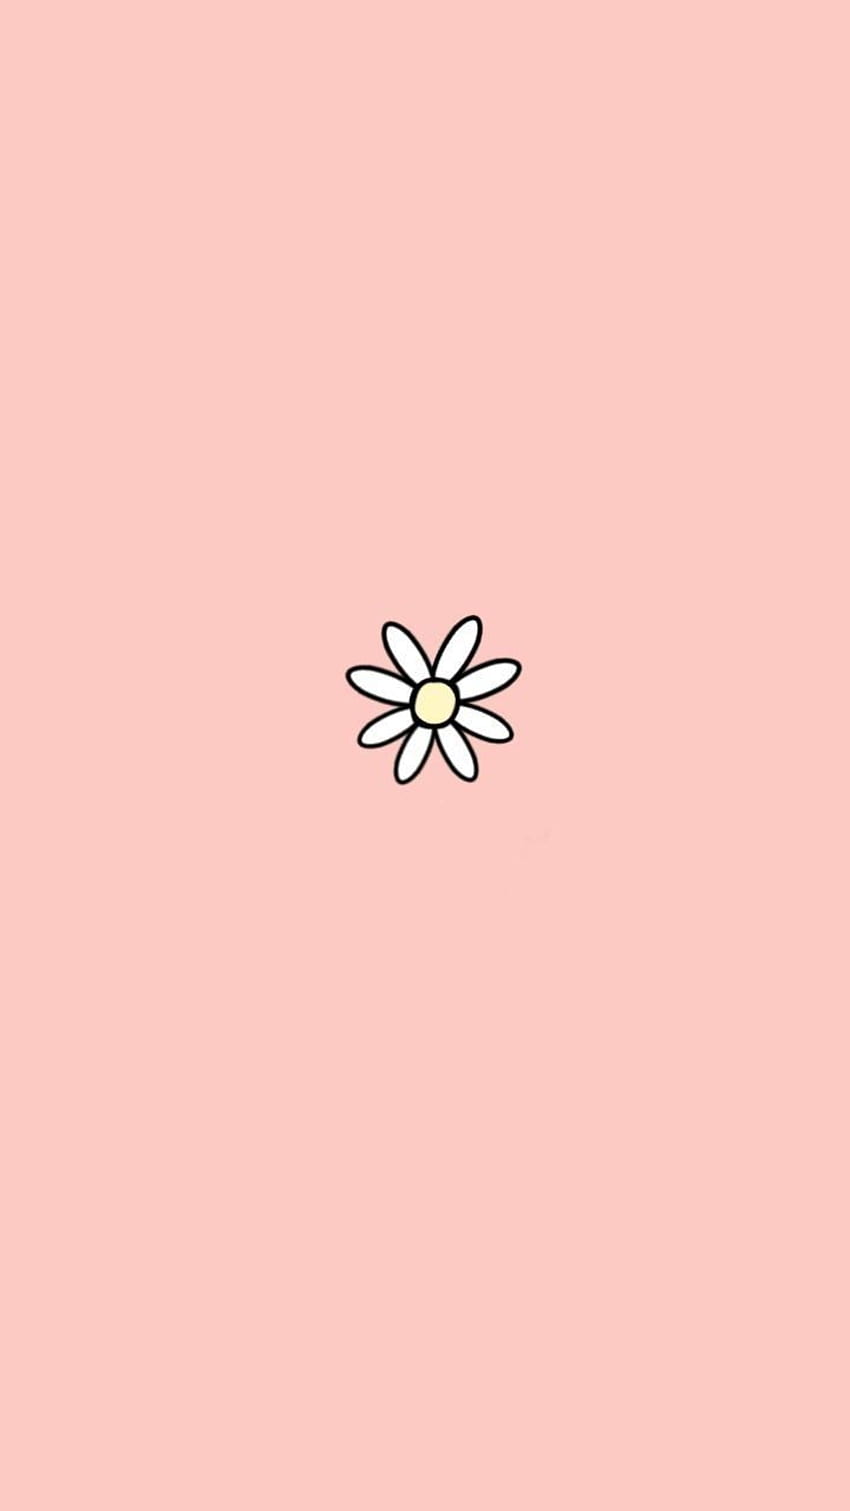 IPhone wallpaper with a white daisy on a pink background - Cute